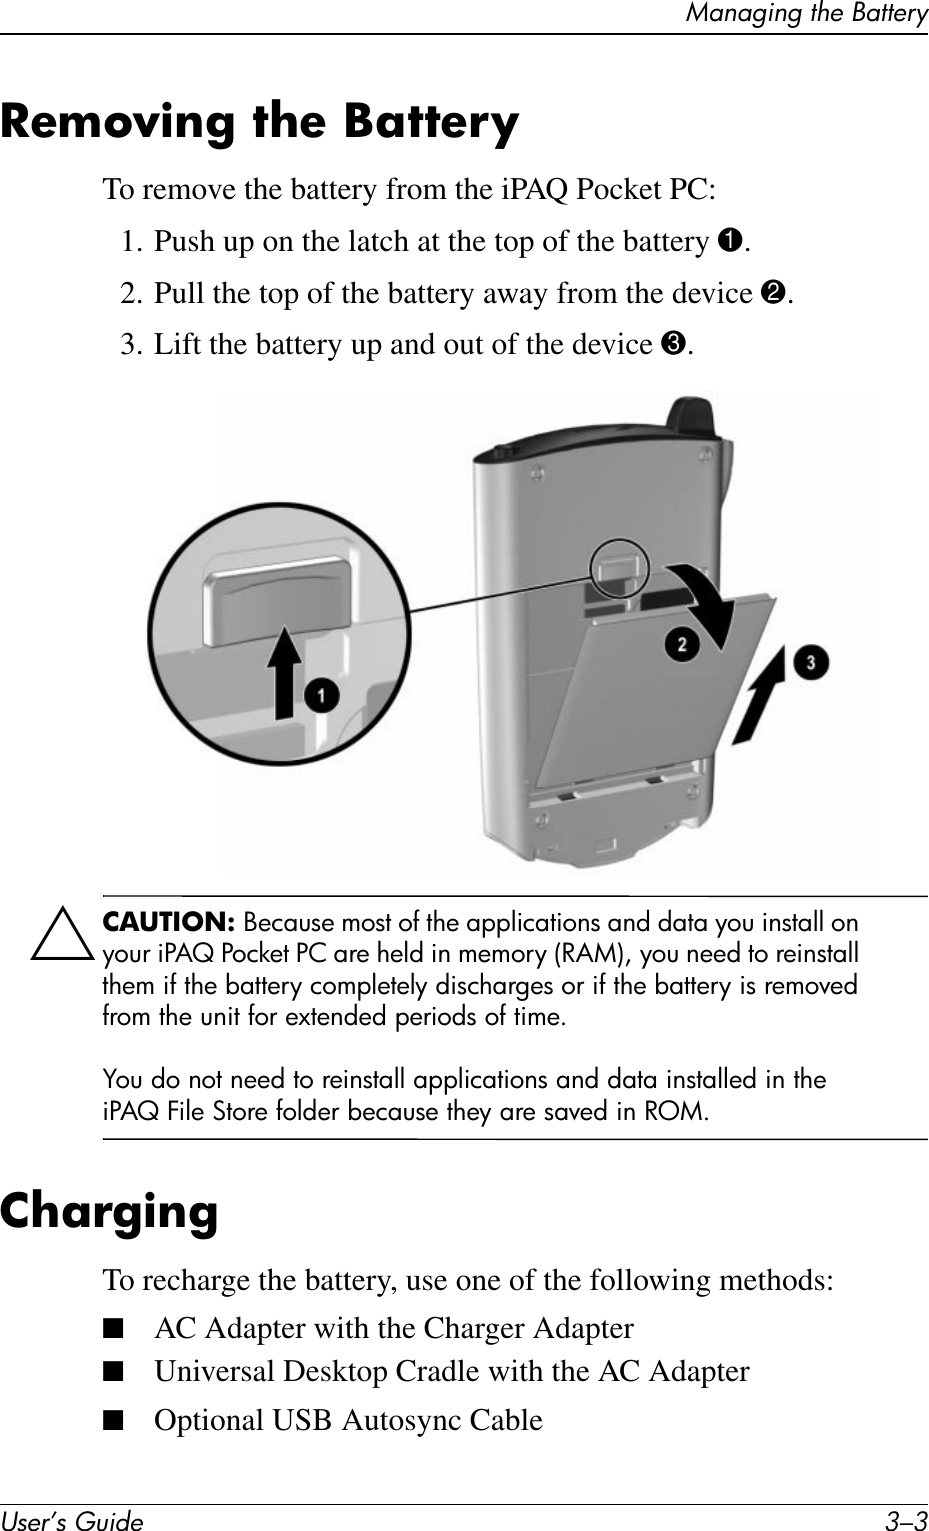 Managing the BatteryUser’s Guide 3–3Removing the BatteryTo remove the battery from the iPAQ Pocket PC:1. Push up on the latch at the top of the battery 1.2. Pull the top of the battery away from the device 2.3. Lift the battery up and out of the device 3.ÄCAUTION: Because most of the applications and data you install on your iPAQ Pocket PC are held in memory (RAM), you need to reinstall them if the battery completely discharges or if the battery is removed from the unit for extended periods of time.You do not need to reinstall applications and data installed in the iPAQ File Store folder because they are saved in ROM.ChargingTo recharge the battery, use one of the following methods:■AC Adapter with the Charger Adapter■Universal Desktop Cradle with the AC Adapter■Optional USB Autosync Cable